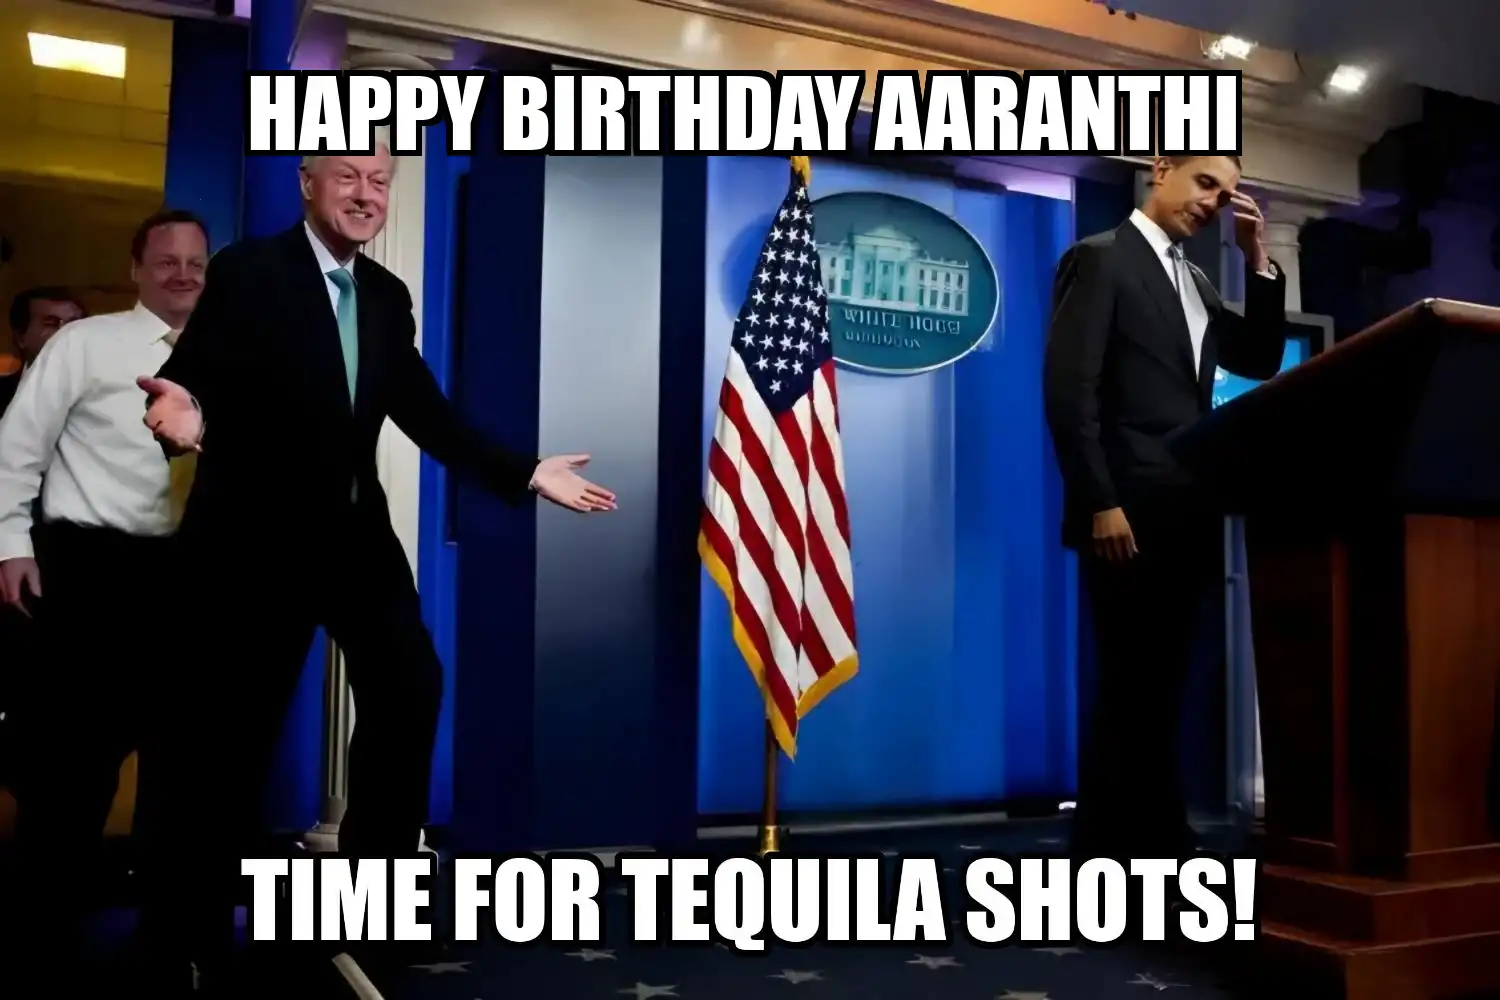 Happy Birthday Aaranthi Time For Tequila Shots Memes